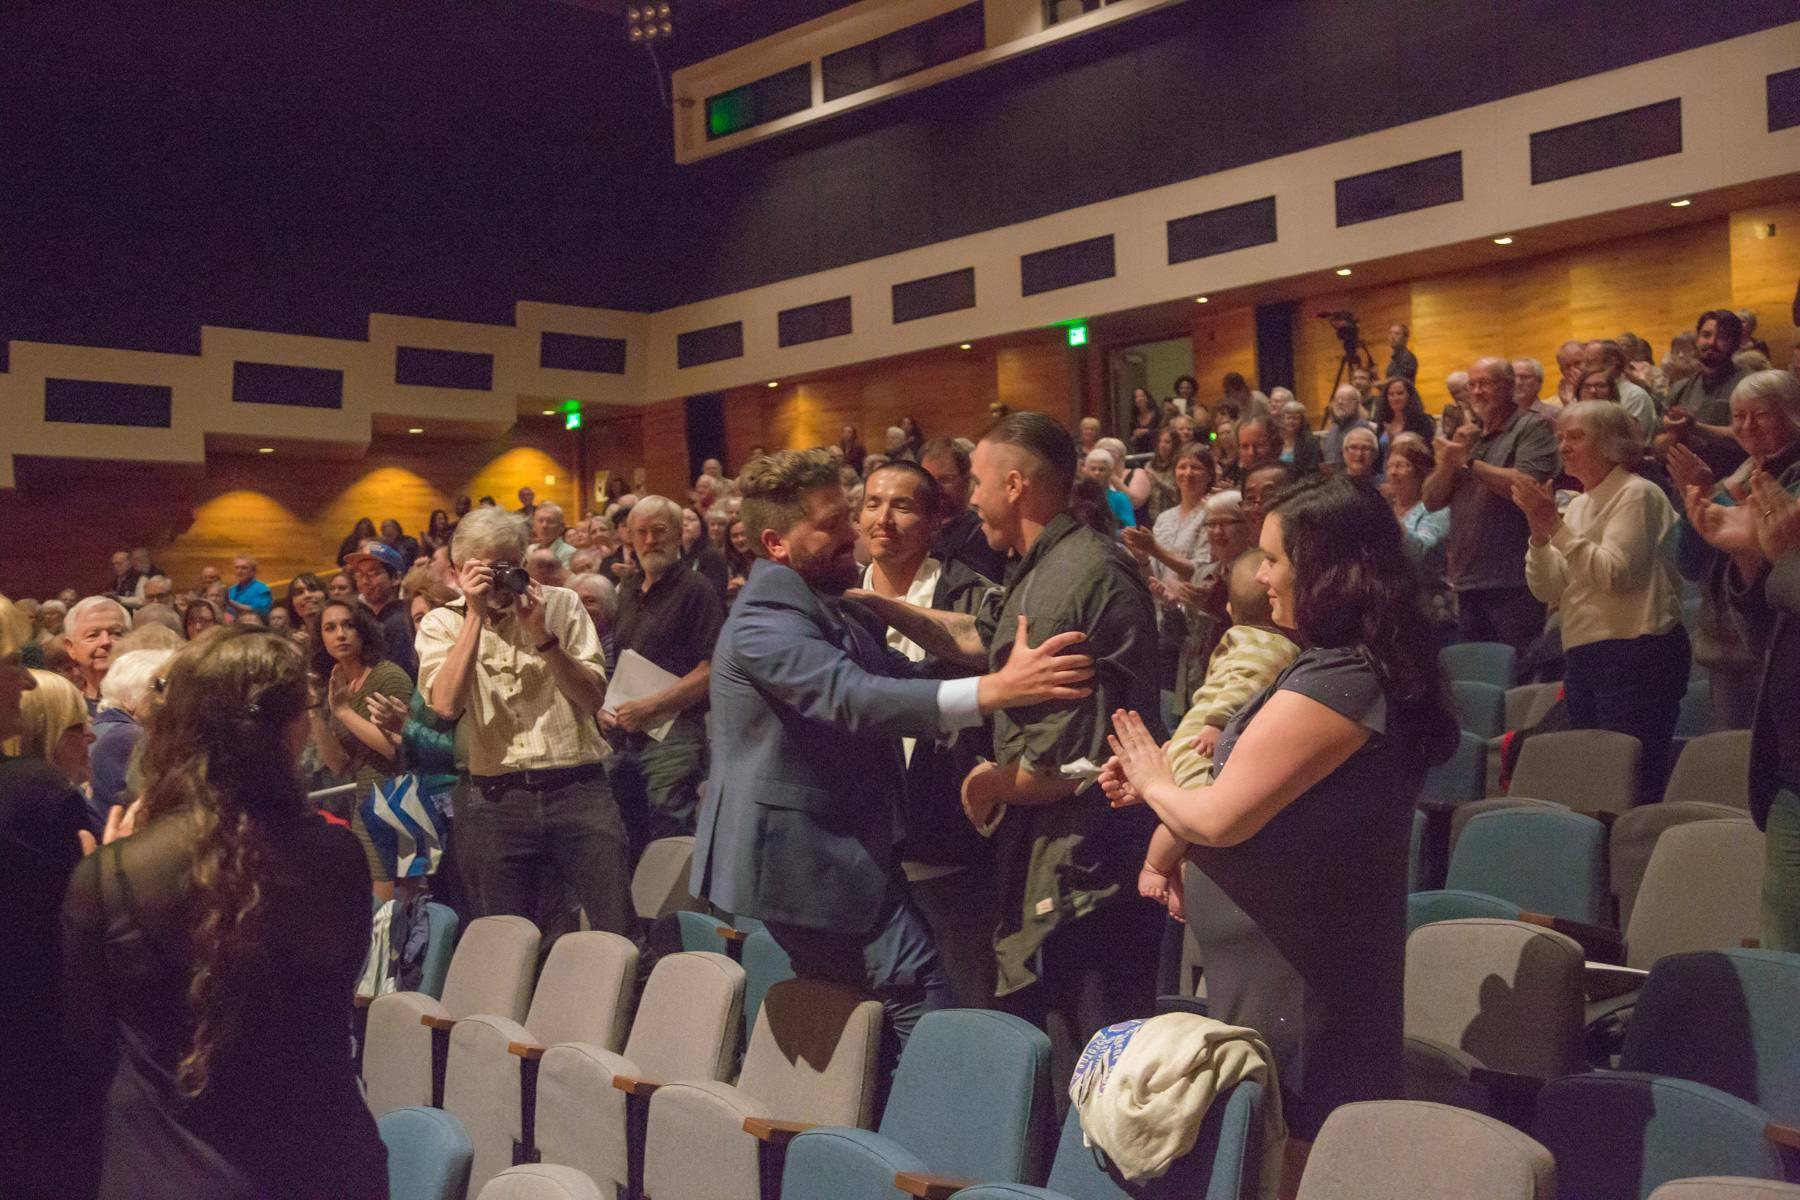 Emerson Eads greets the Fairbanks Four and their family members after the "Mass for the Oppressed" world premiere. (Photo courtesy of UAF)